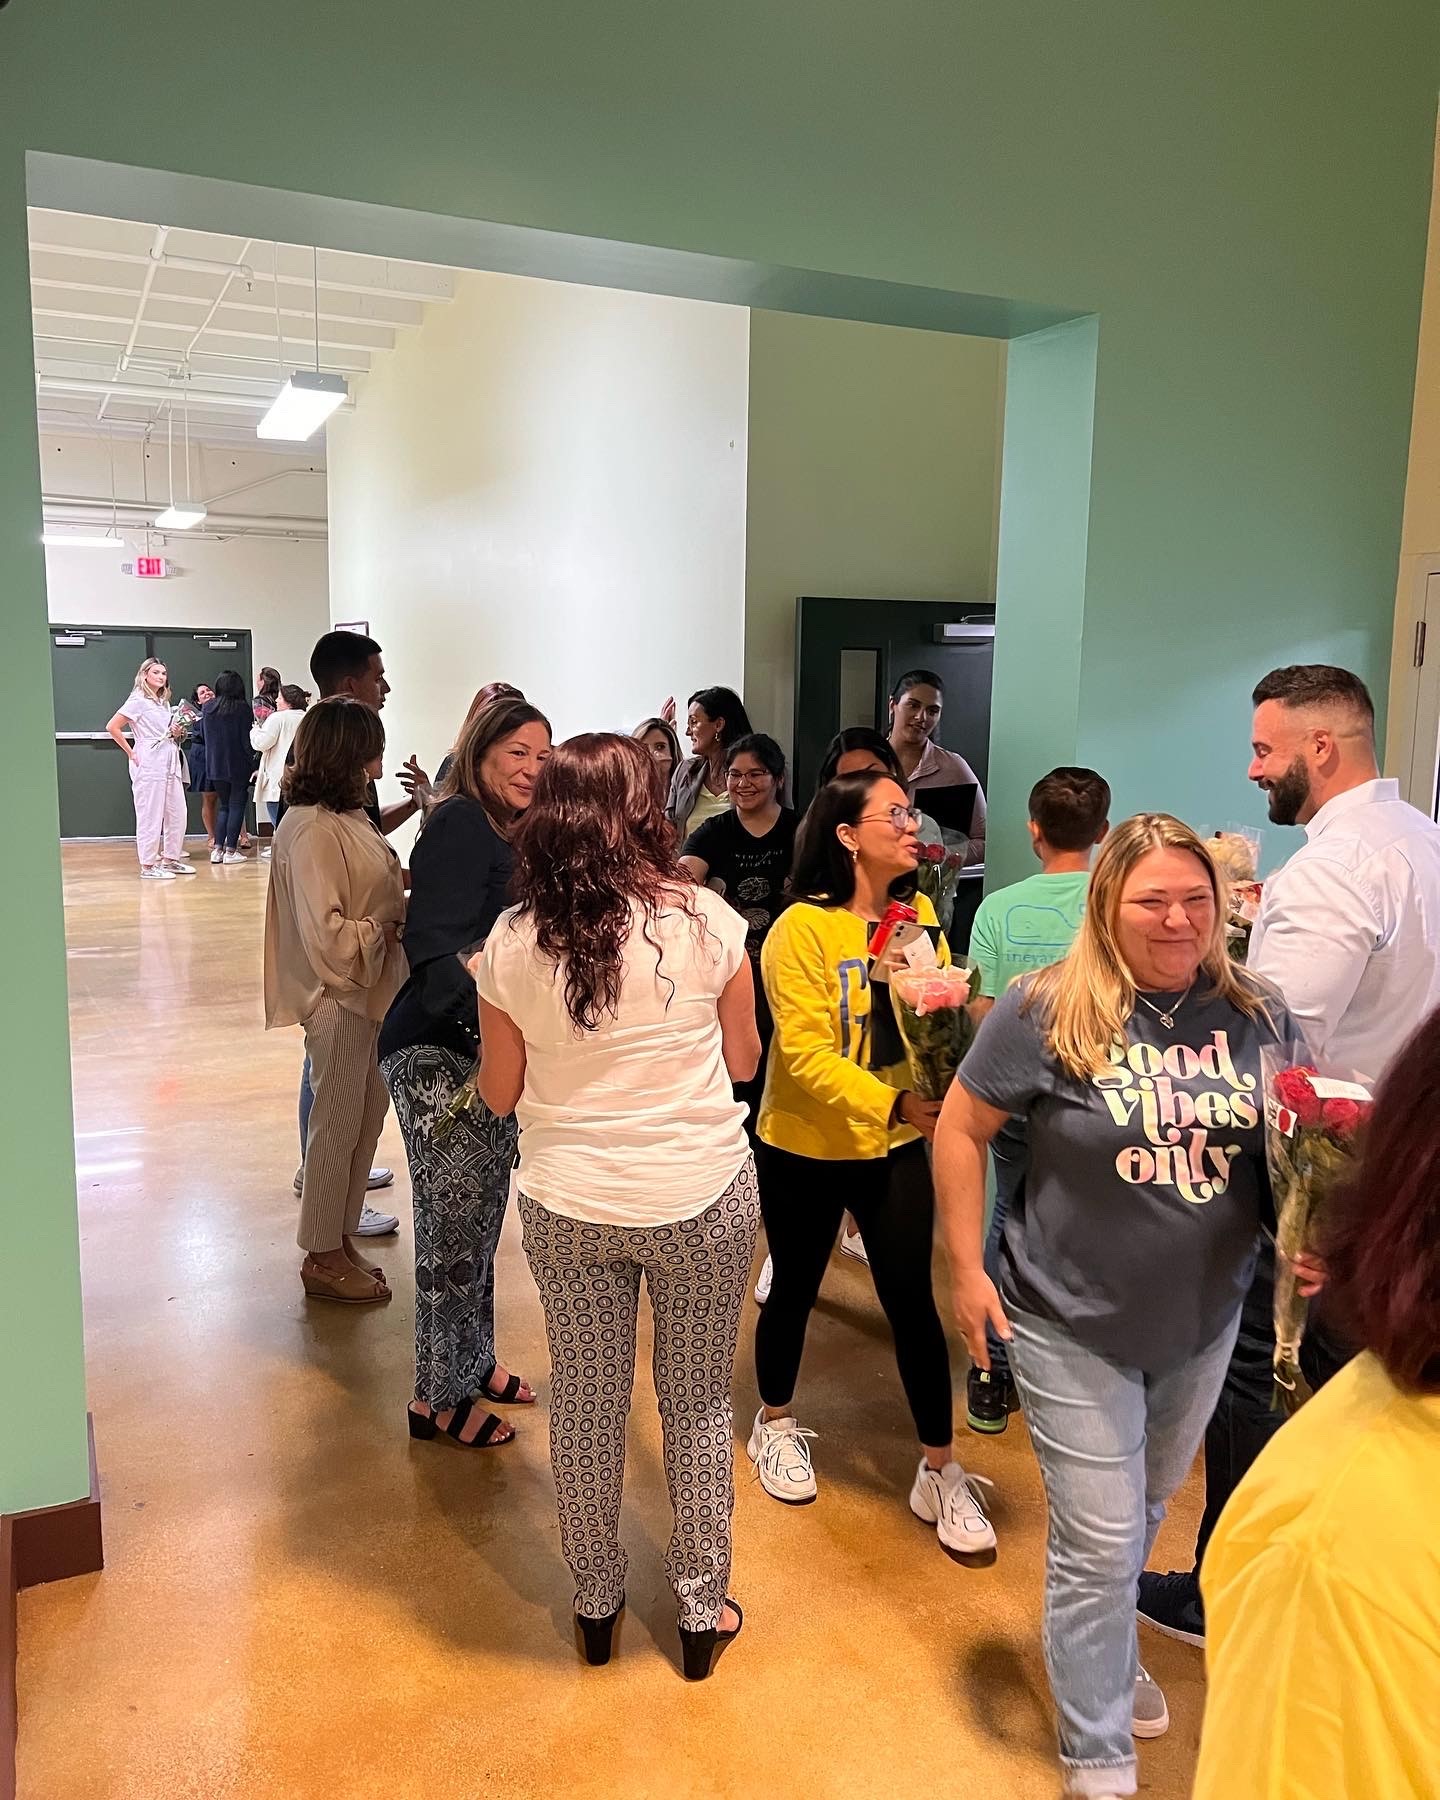 National Grassroot Flower Movement spreads to Miami by surprising teachers at Doral Academy Elementary with appreciative flower bouquets before the start of the school year